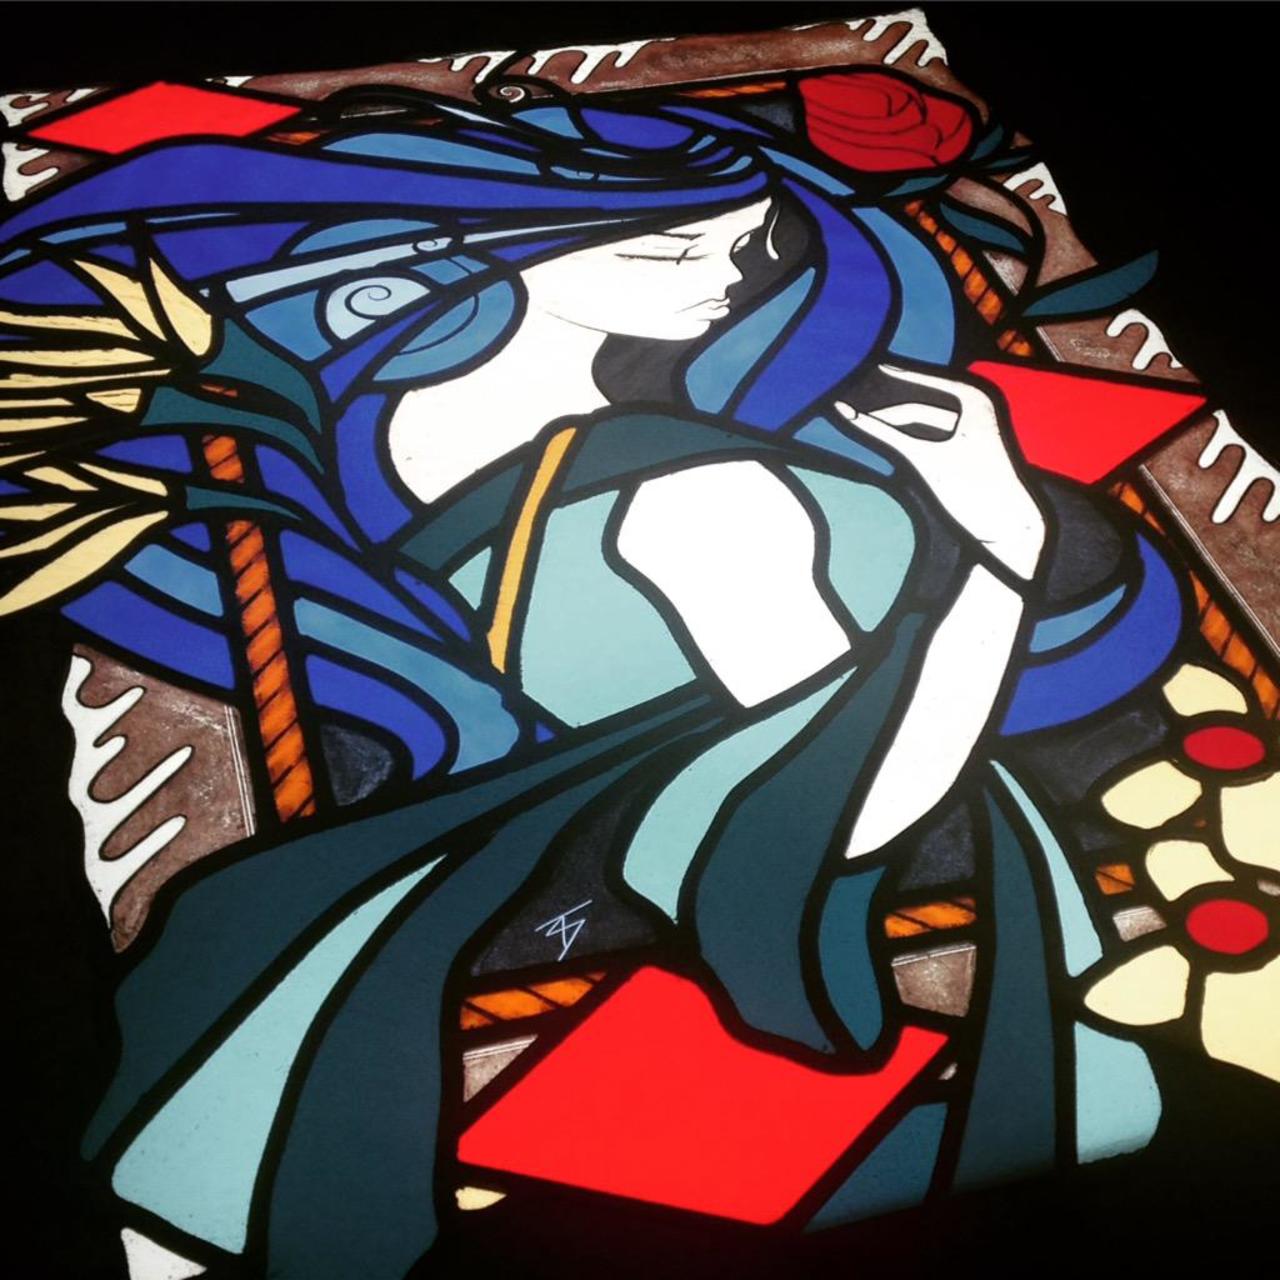 Ink Nouveau Stained Glass coming on strong in collaboration with Tom Spencer #monikerartfair #graffiti #streetart http://t.co/U2Ufbb2qgP